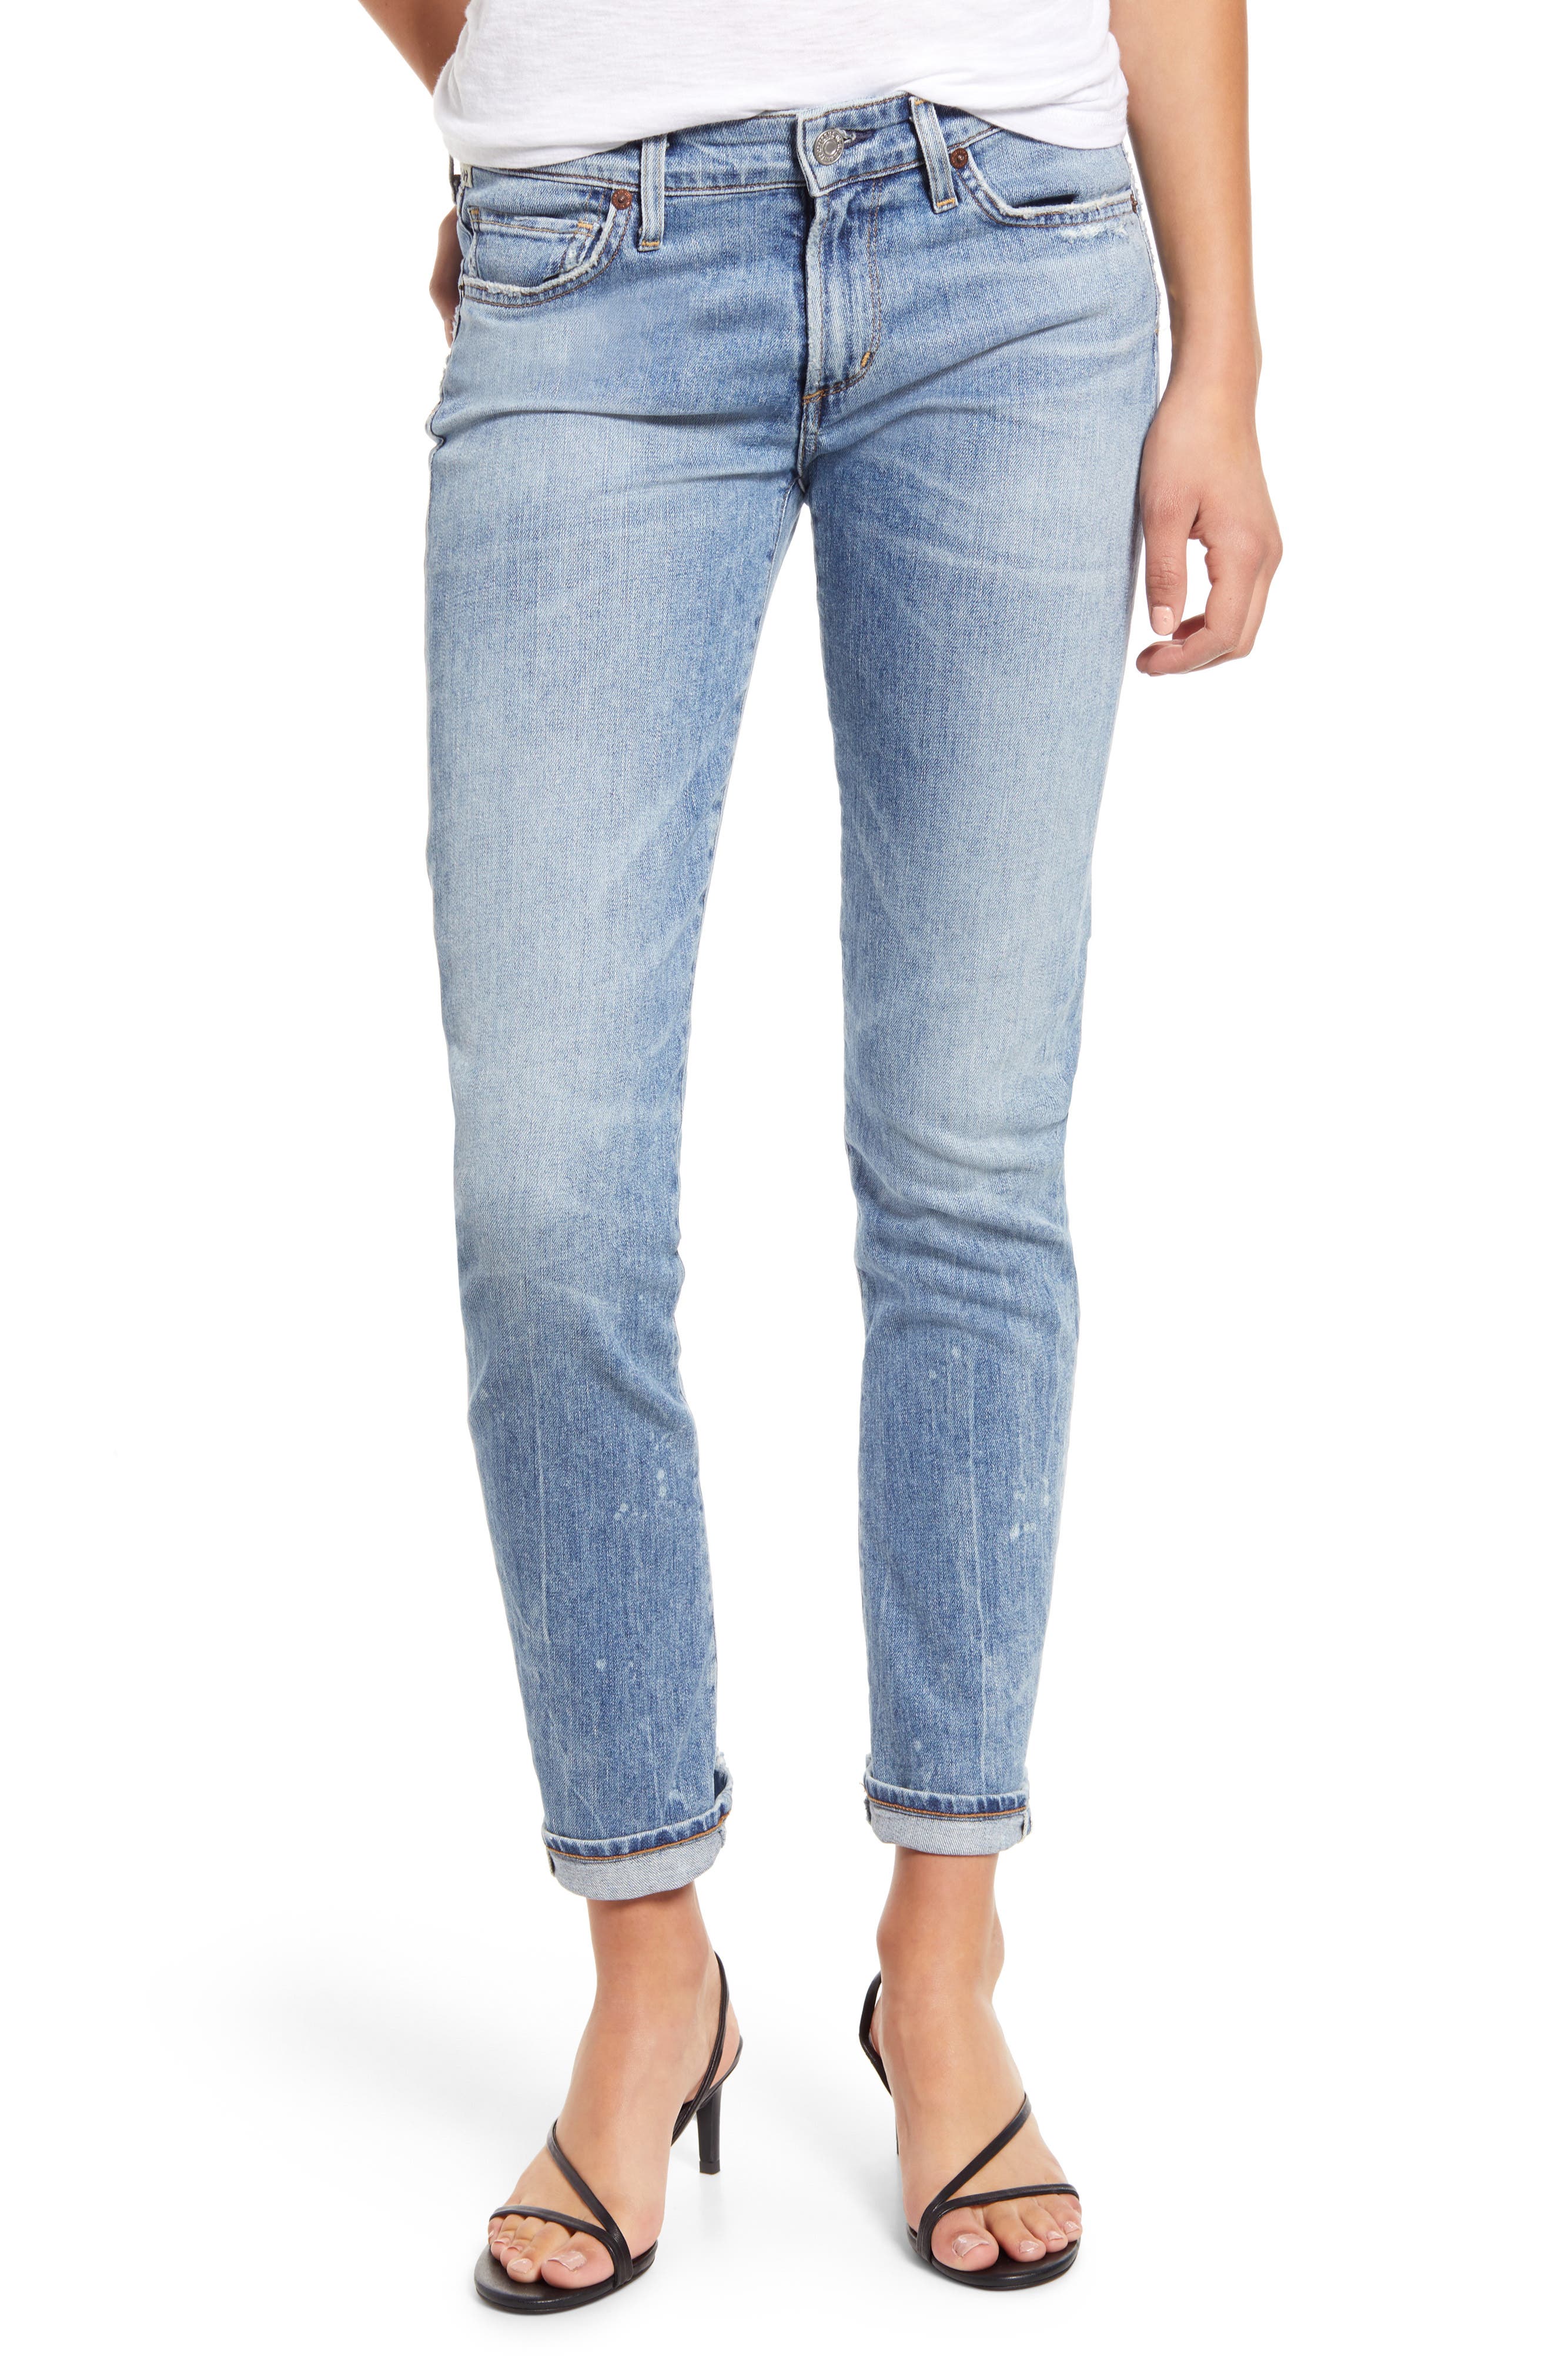 citizens of humanity racer low rise skinny jeans